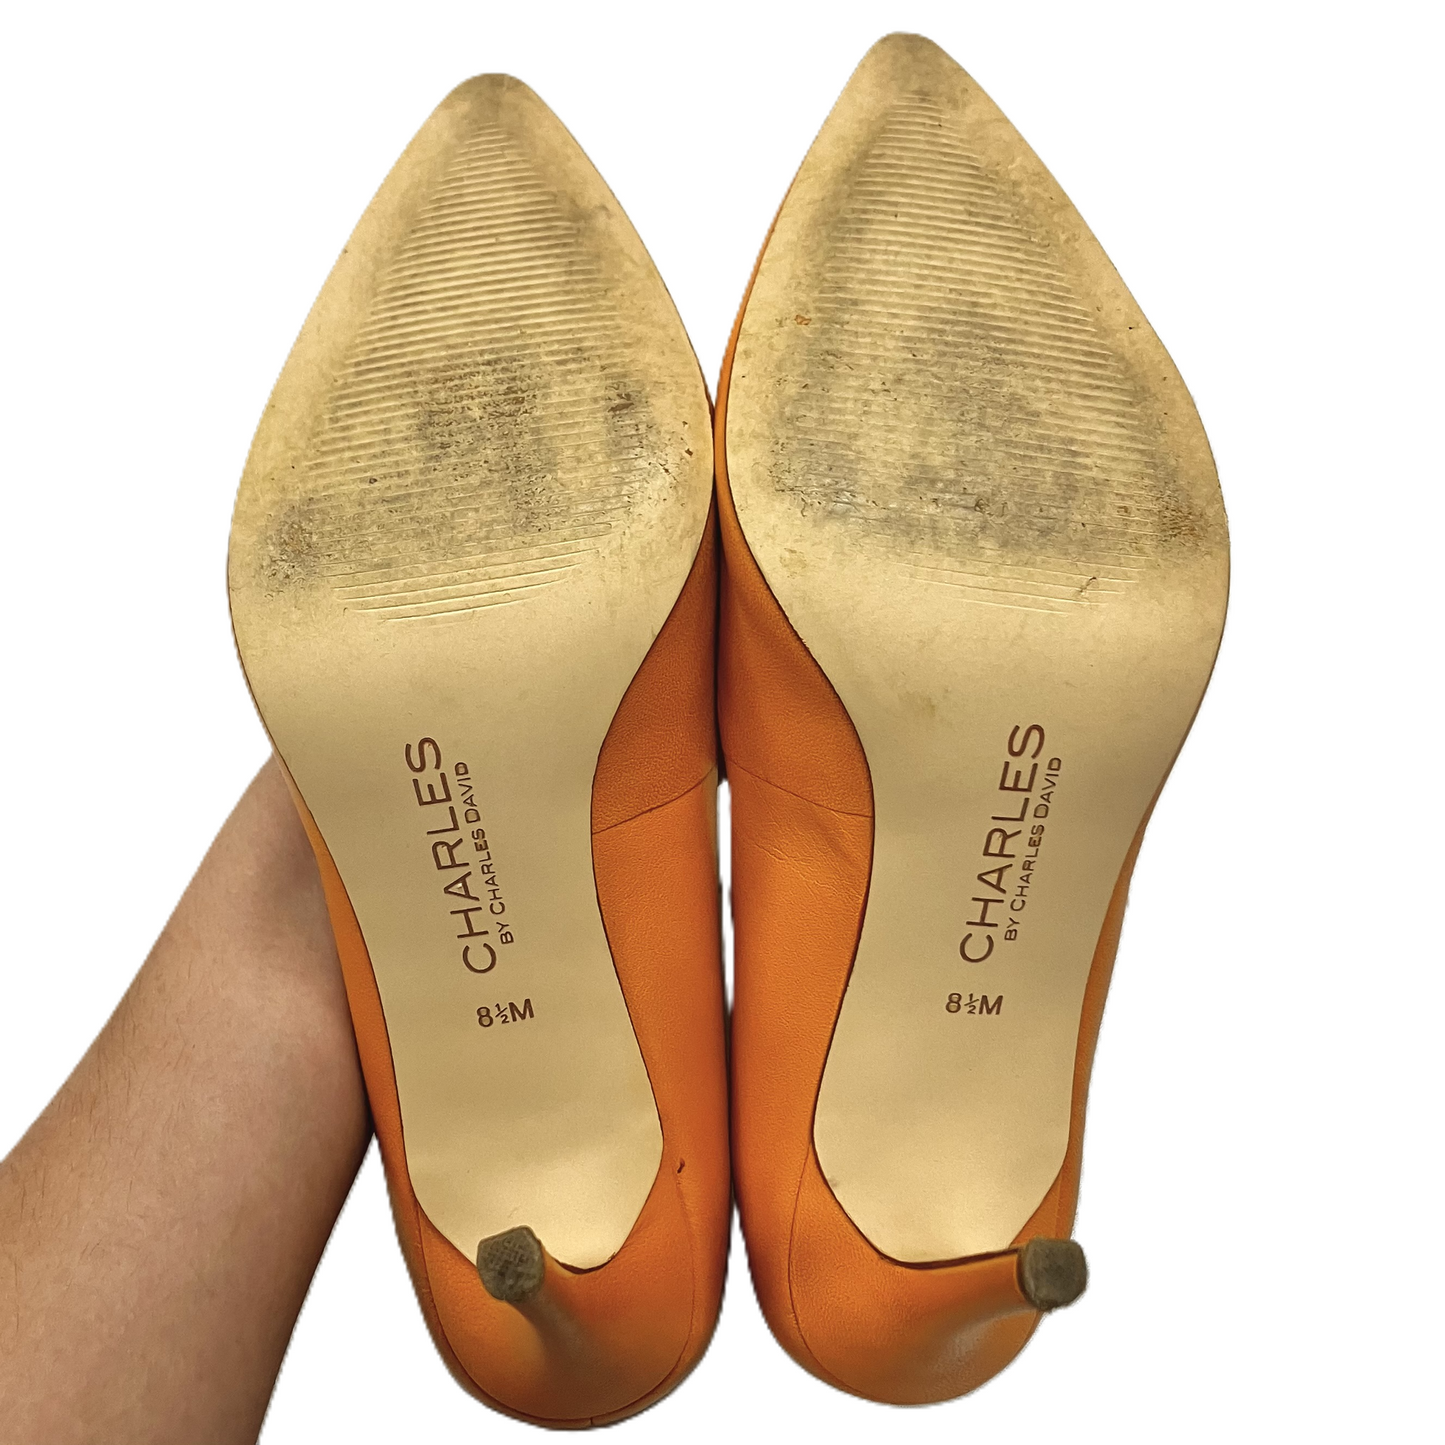 Orange Shoes Heels Stiletto By Charles By Charles David, Size: 8.5